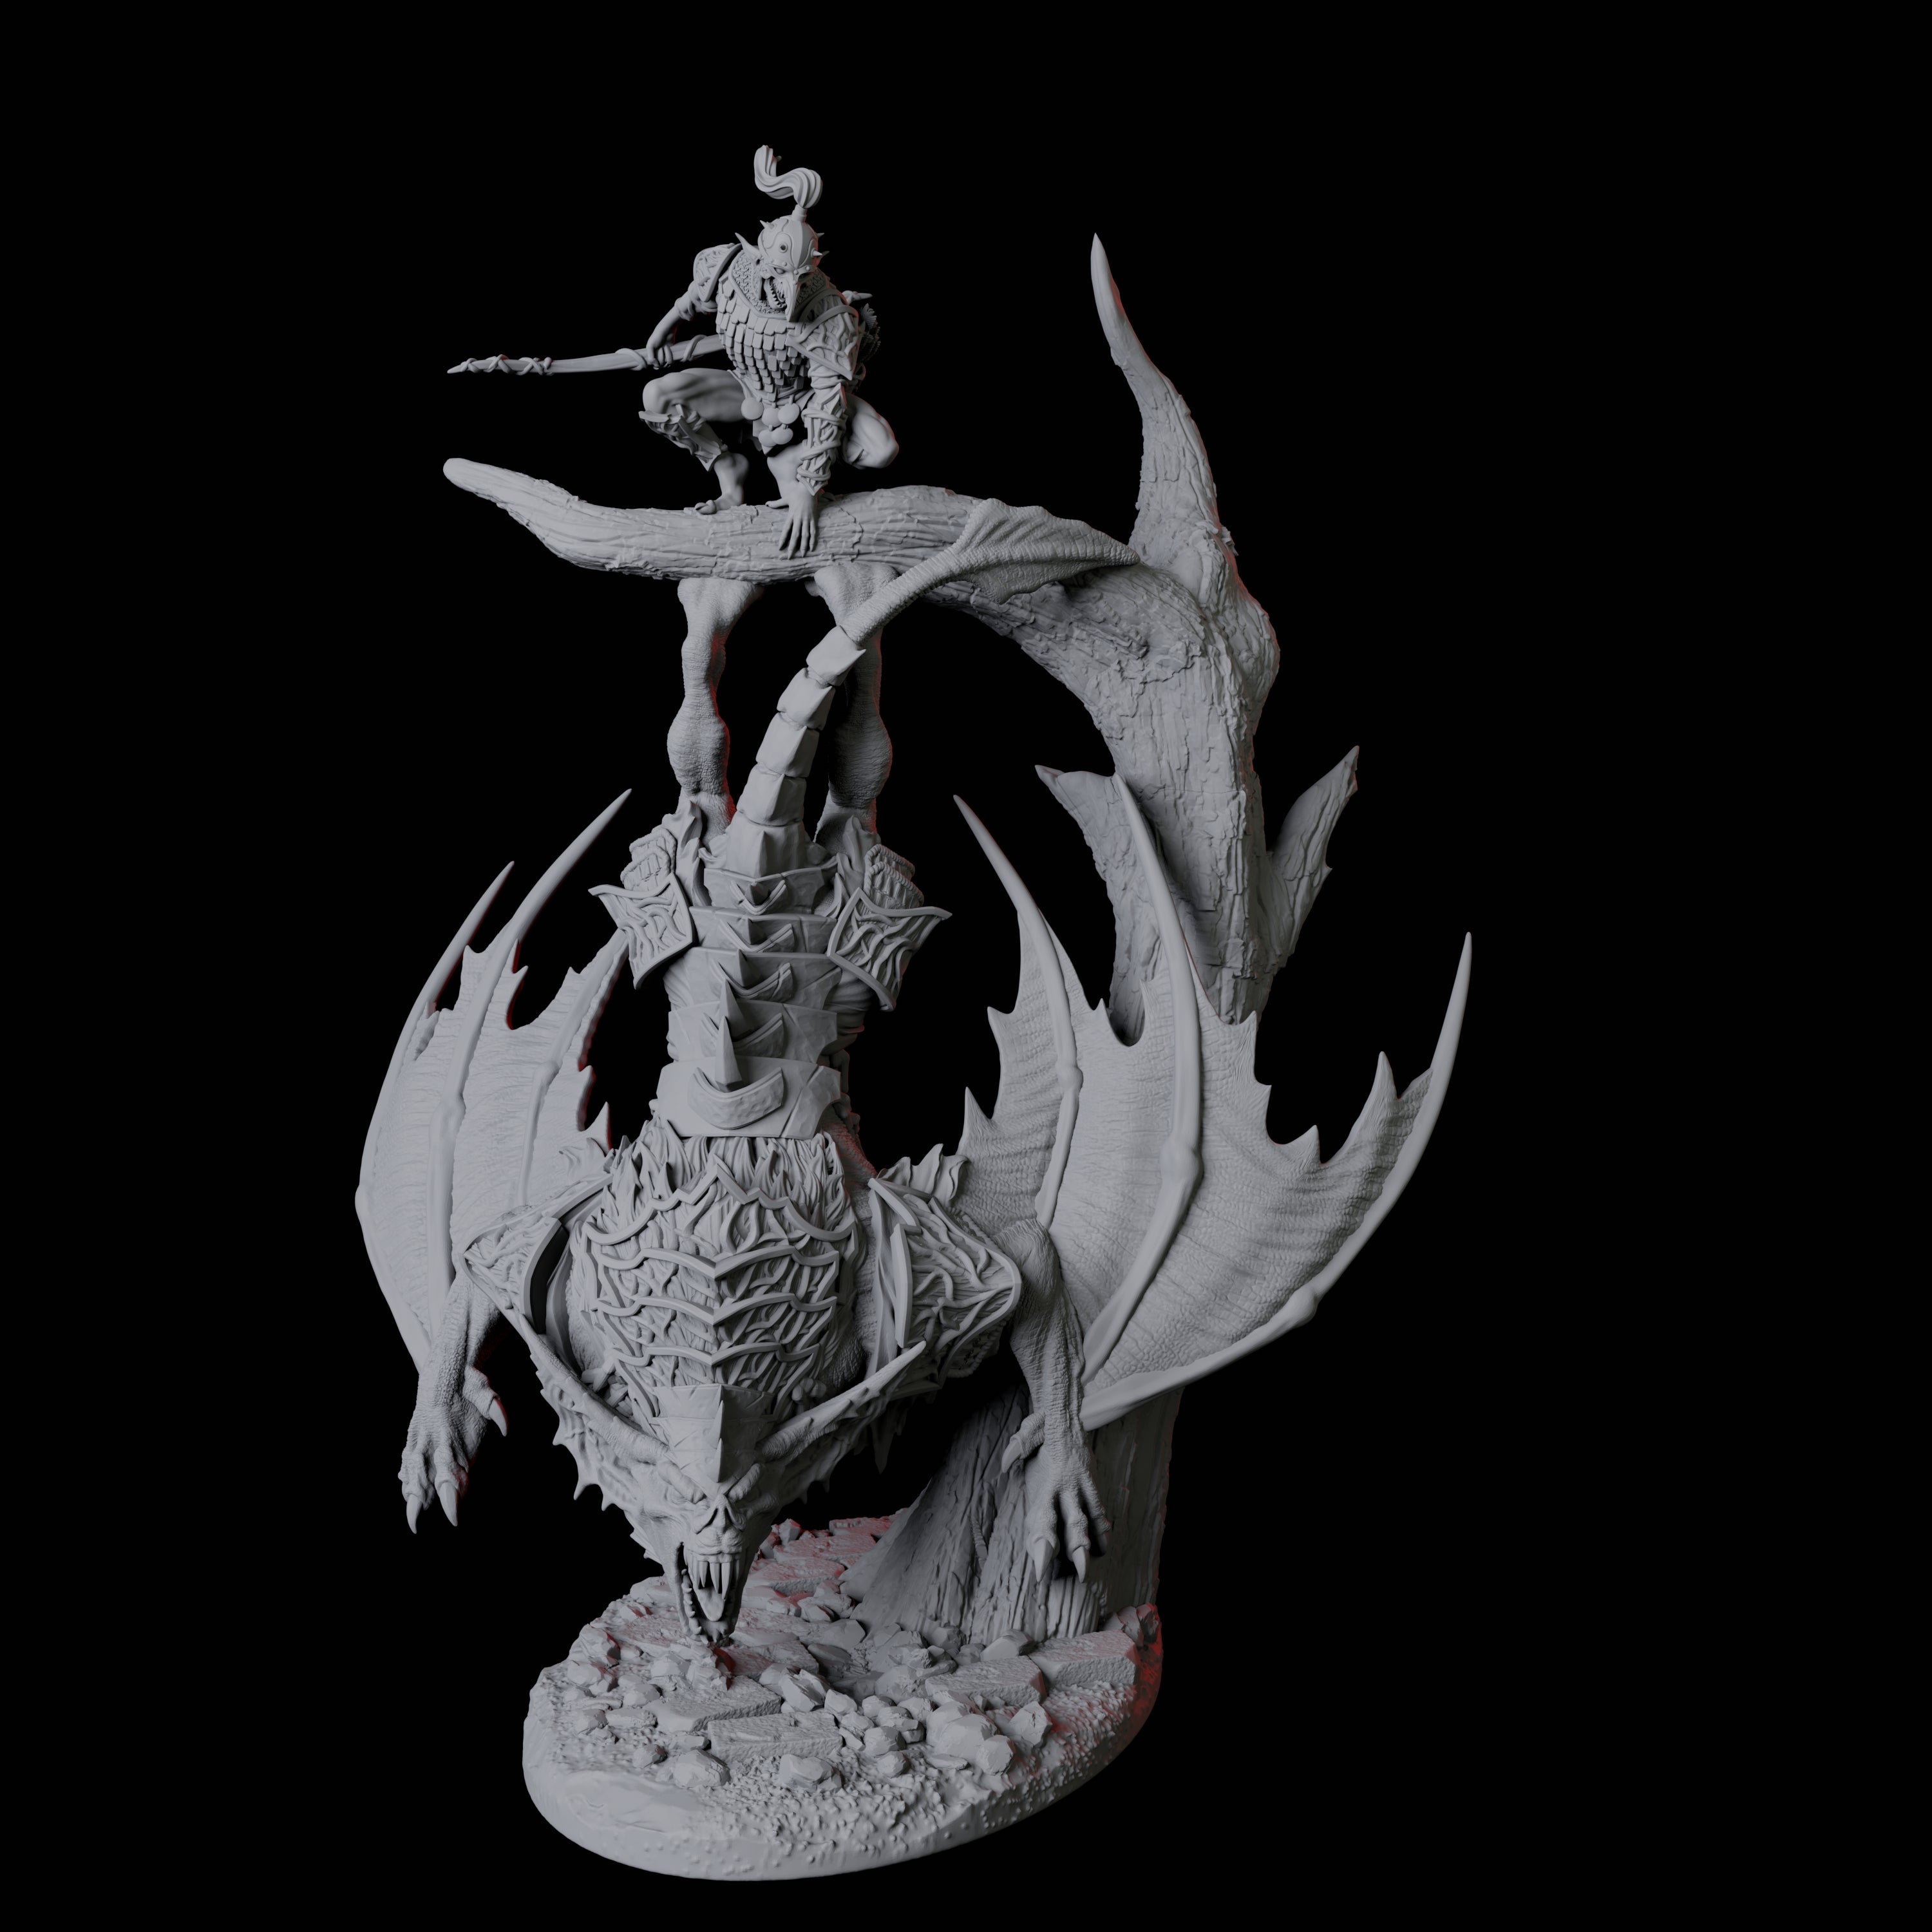 Swooping Vampire Spawn on Giant Bat D Miniature for Dungeons and Dragons, Pathfinder or other TTRPGs